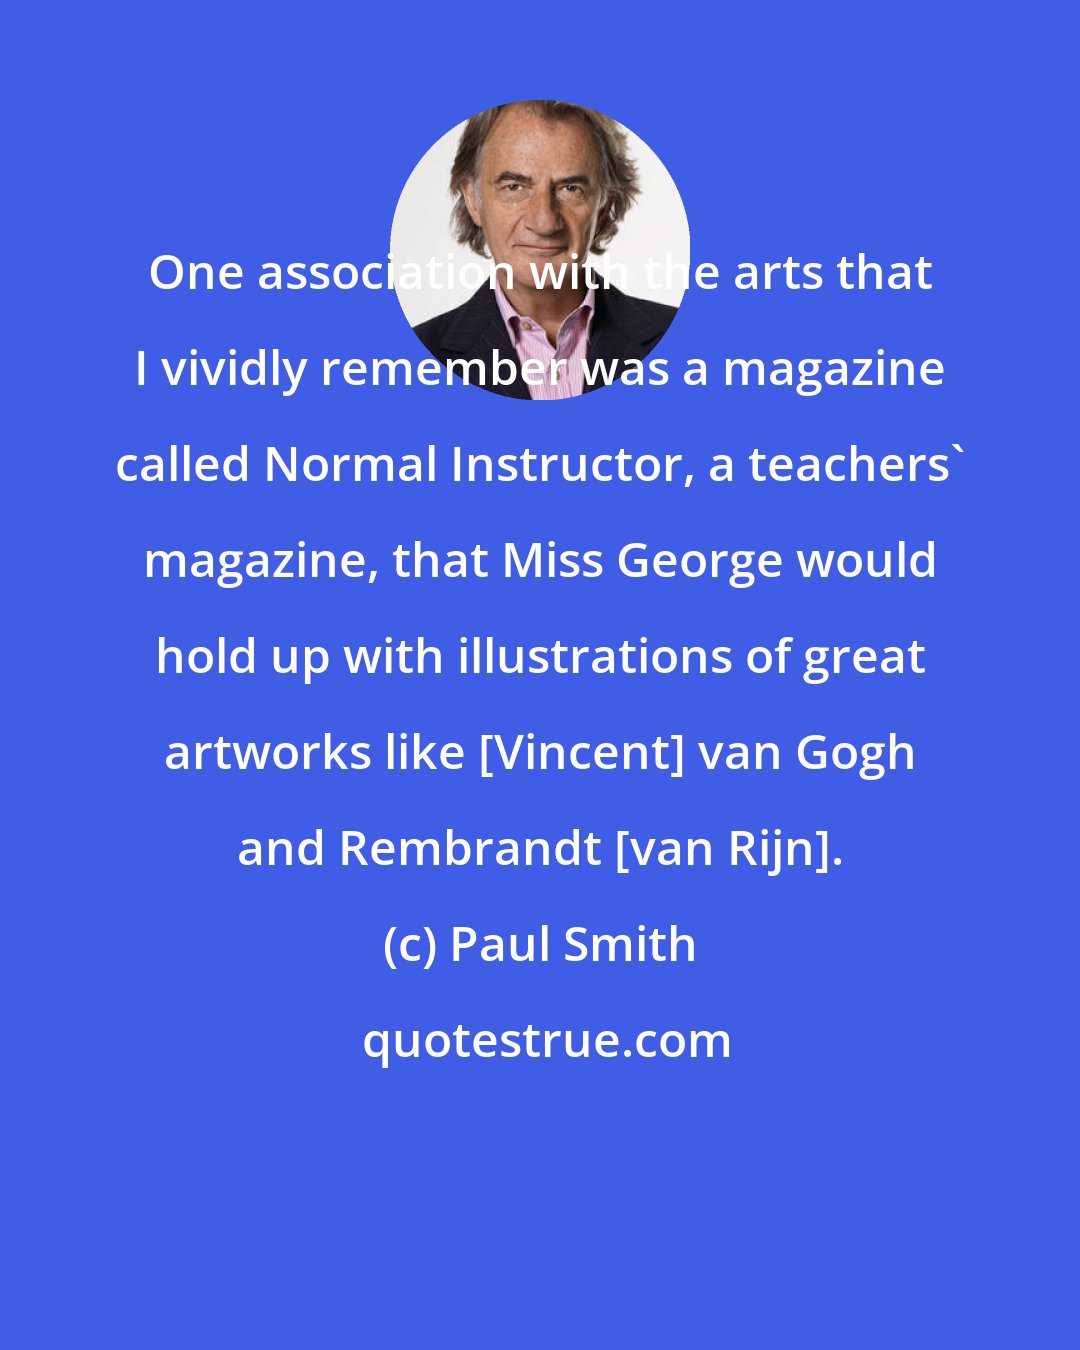 Paul Smith: One association with the arts that I vividly remember was a magazine called Normal Instructor, a teachers' magazine, that Miss George would hold up with illustrations of great artworks like [Vincent] van Gogh and Rembrandt [van Rijn].